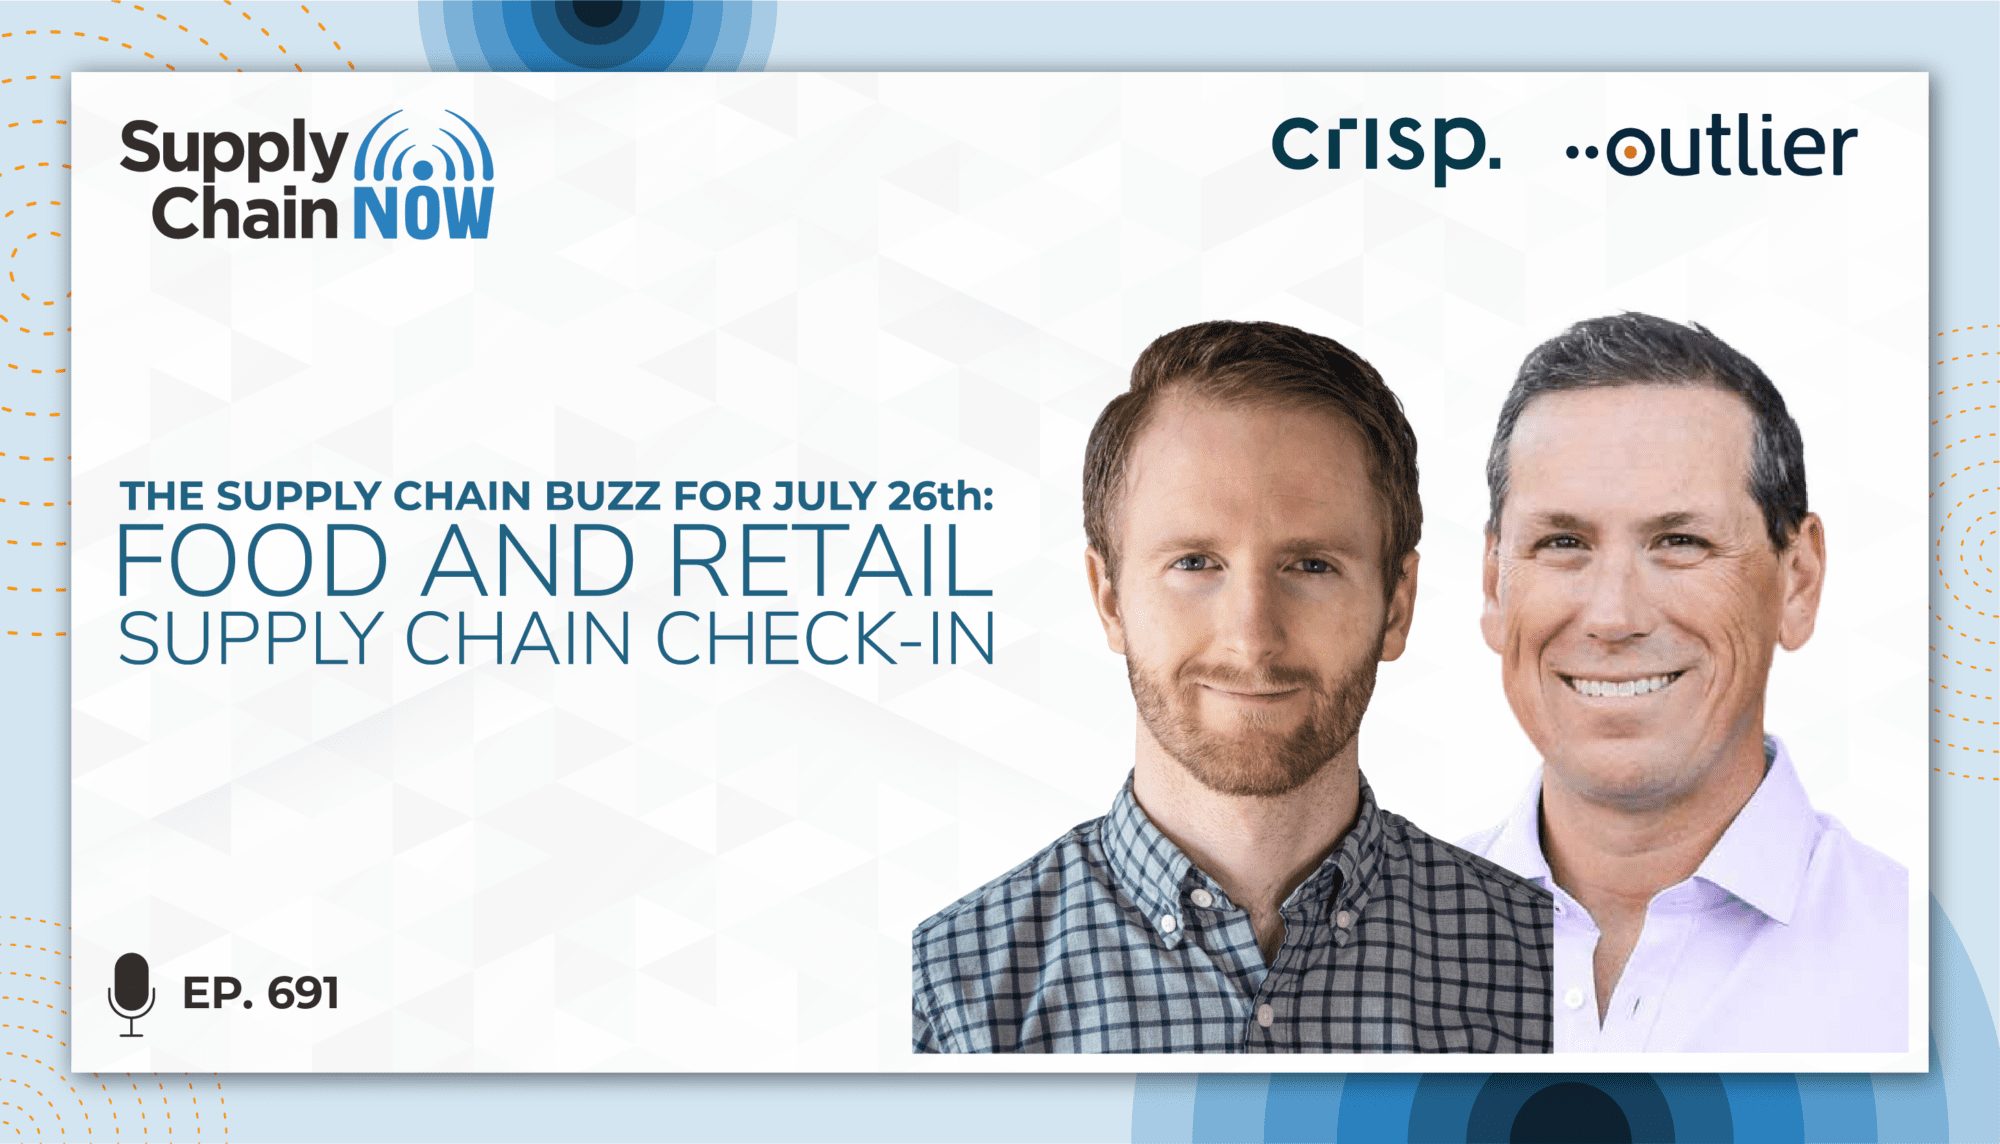 Food and Retail Supply Chain Check-In on The Supply Chain Buzz